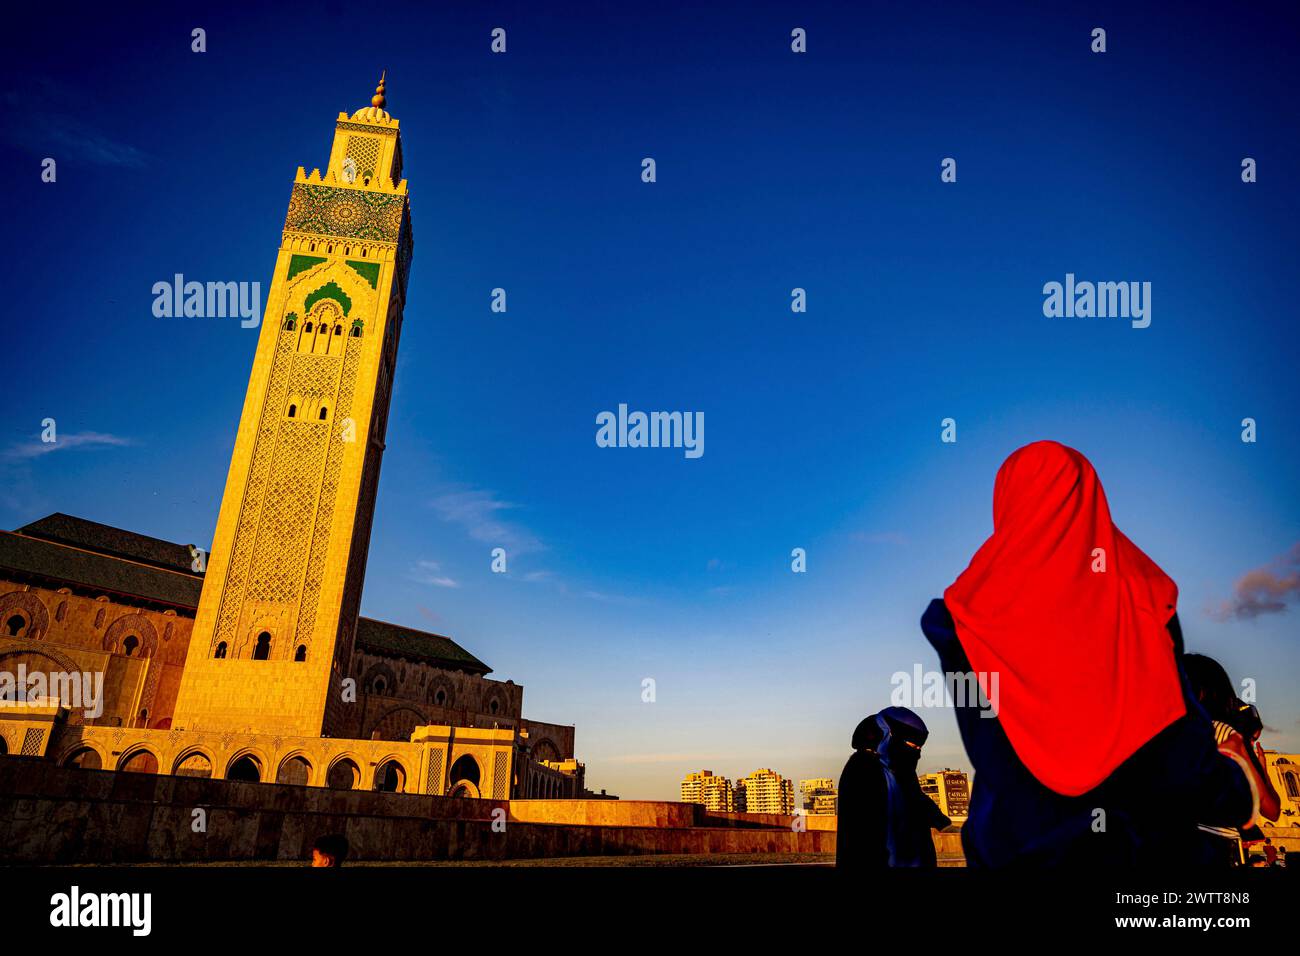 A person in a vibrant red headscarf gazes at a majestic mosque tower against a deep blue sky at sunset. Stock Photo